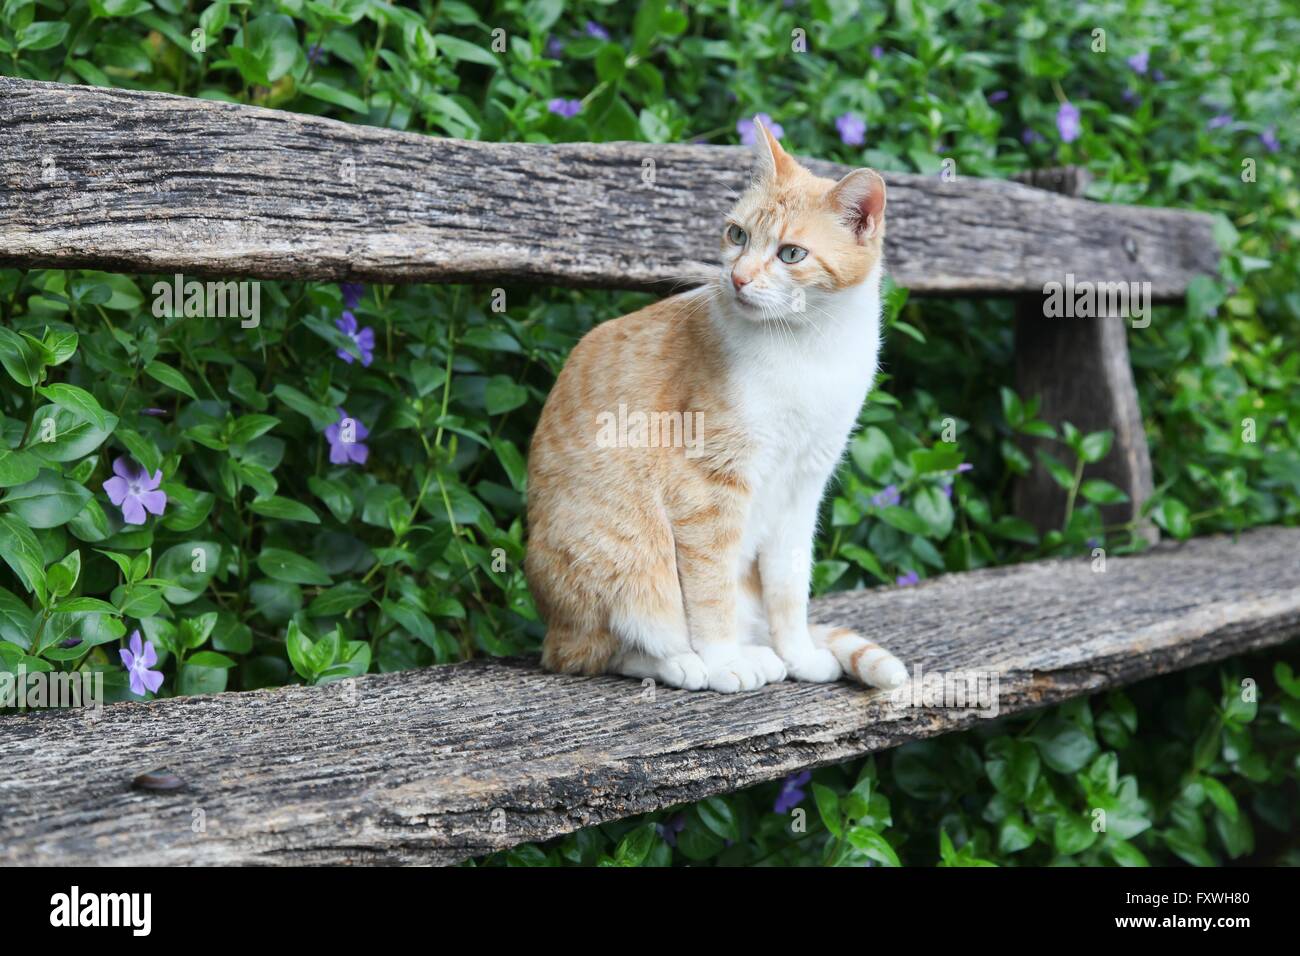 Cat Sitting On A Bench Stock Photo Alamy